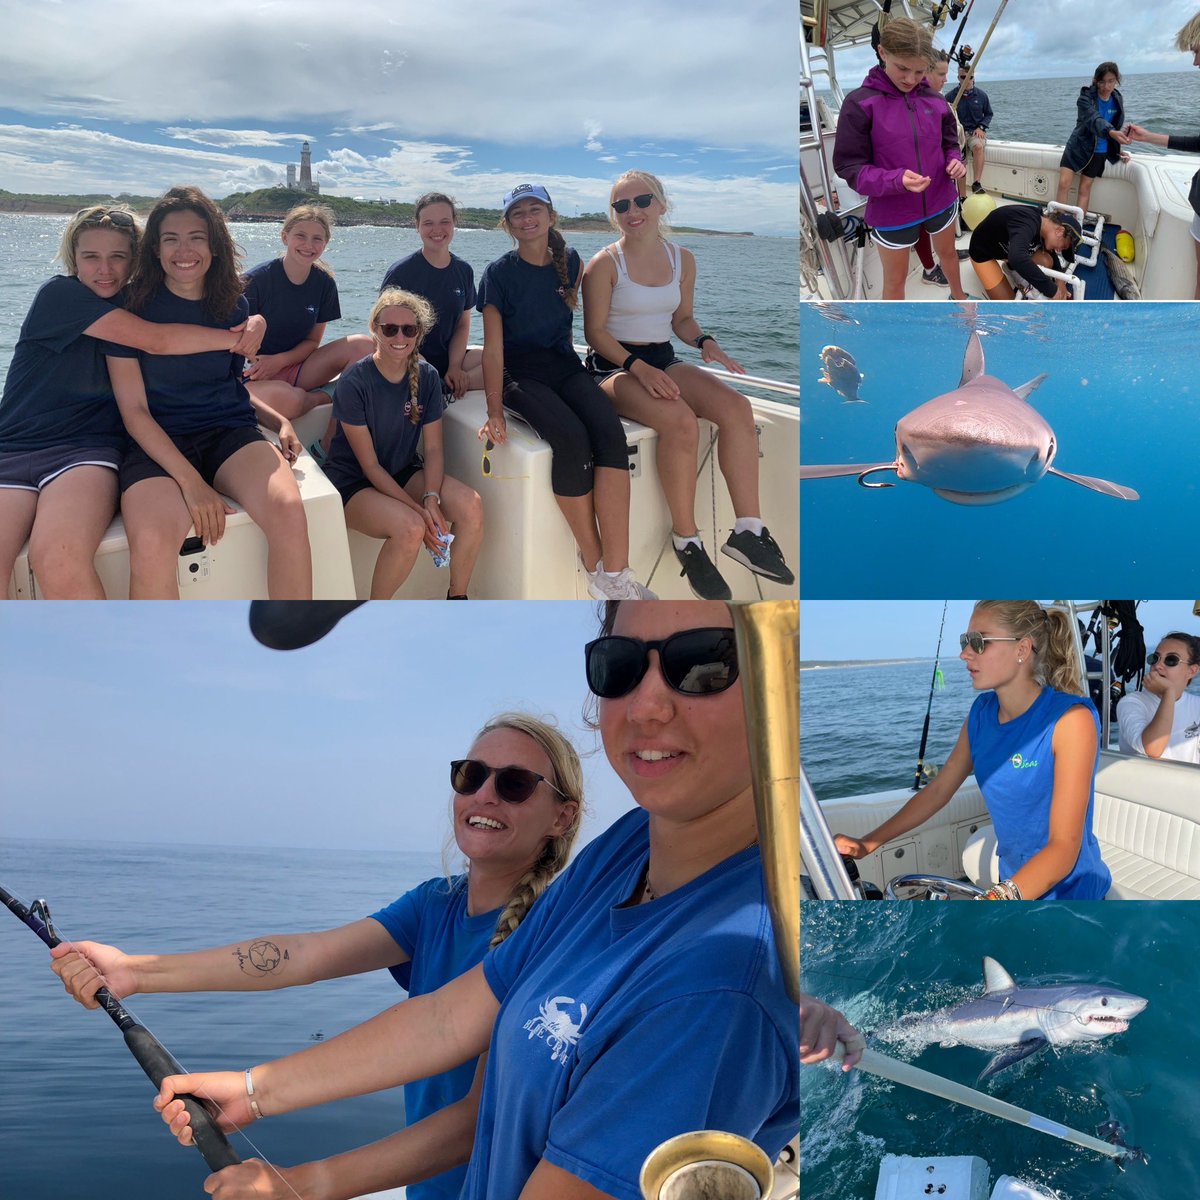 $500 scholarship available for our girl’s #sharkcamp in #montauk, ny! This opportunity is open to high school students and details can be found by emailing us at oseasfdn@gmail.com. Good luck!!! oseasfdn.org